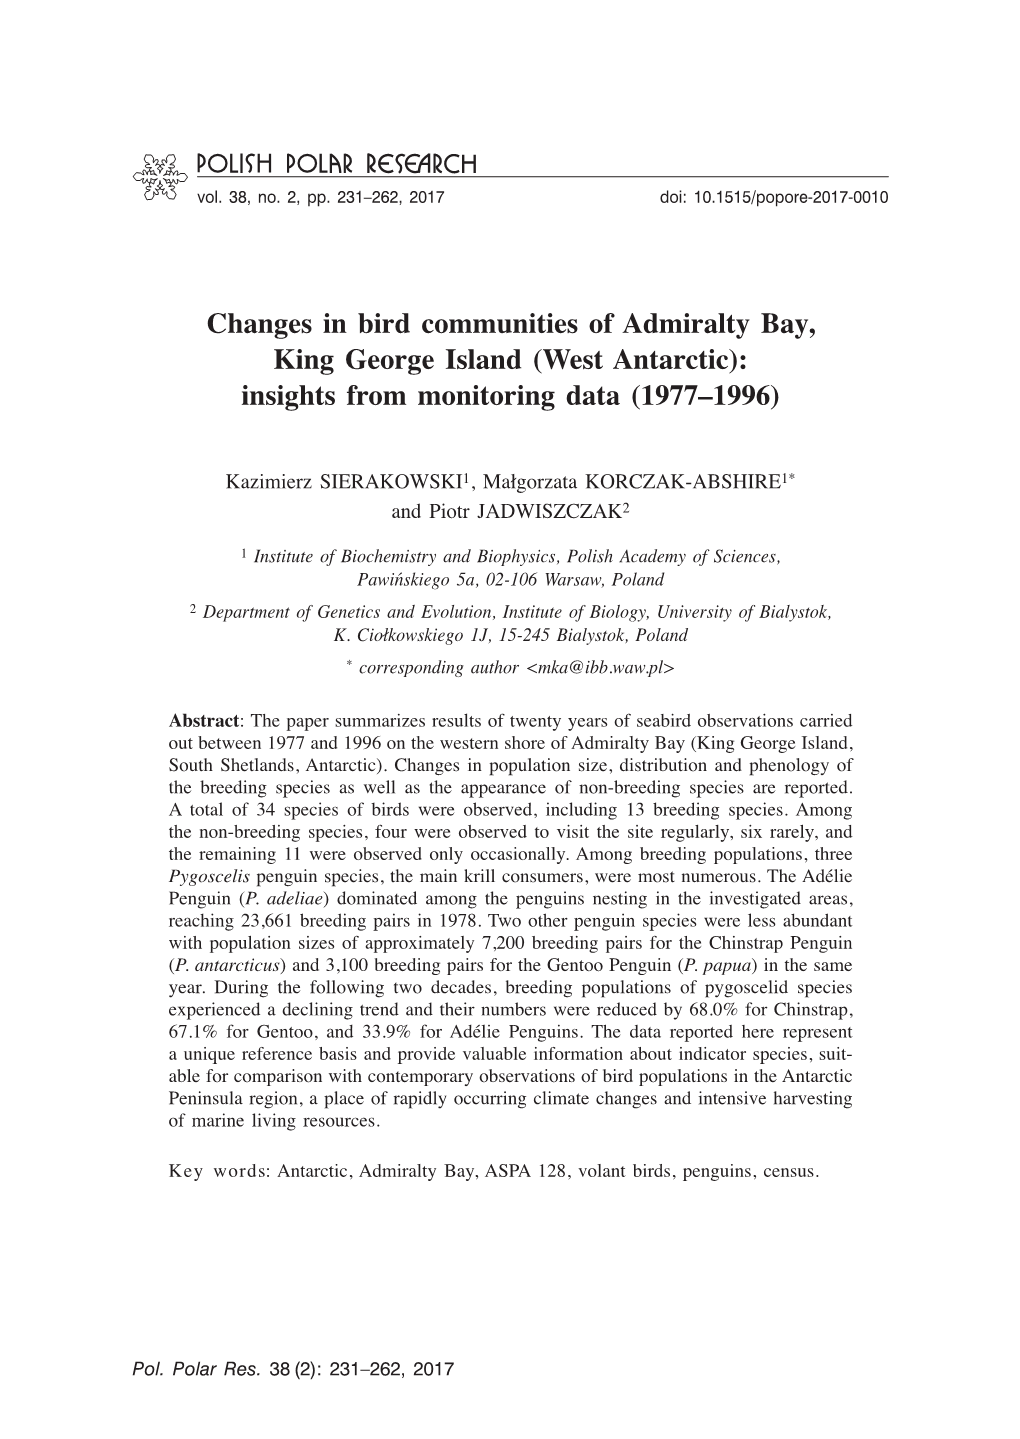 Changes in Bird Communities of Admiralty Bay, King George Island (West Antarctic): Insights from Monitoring Data (1977–1996)